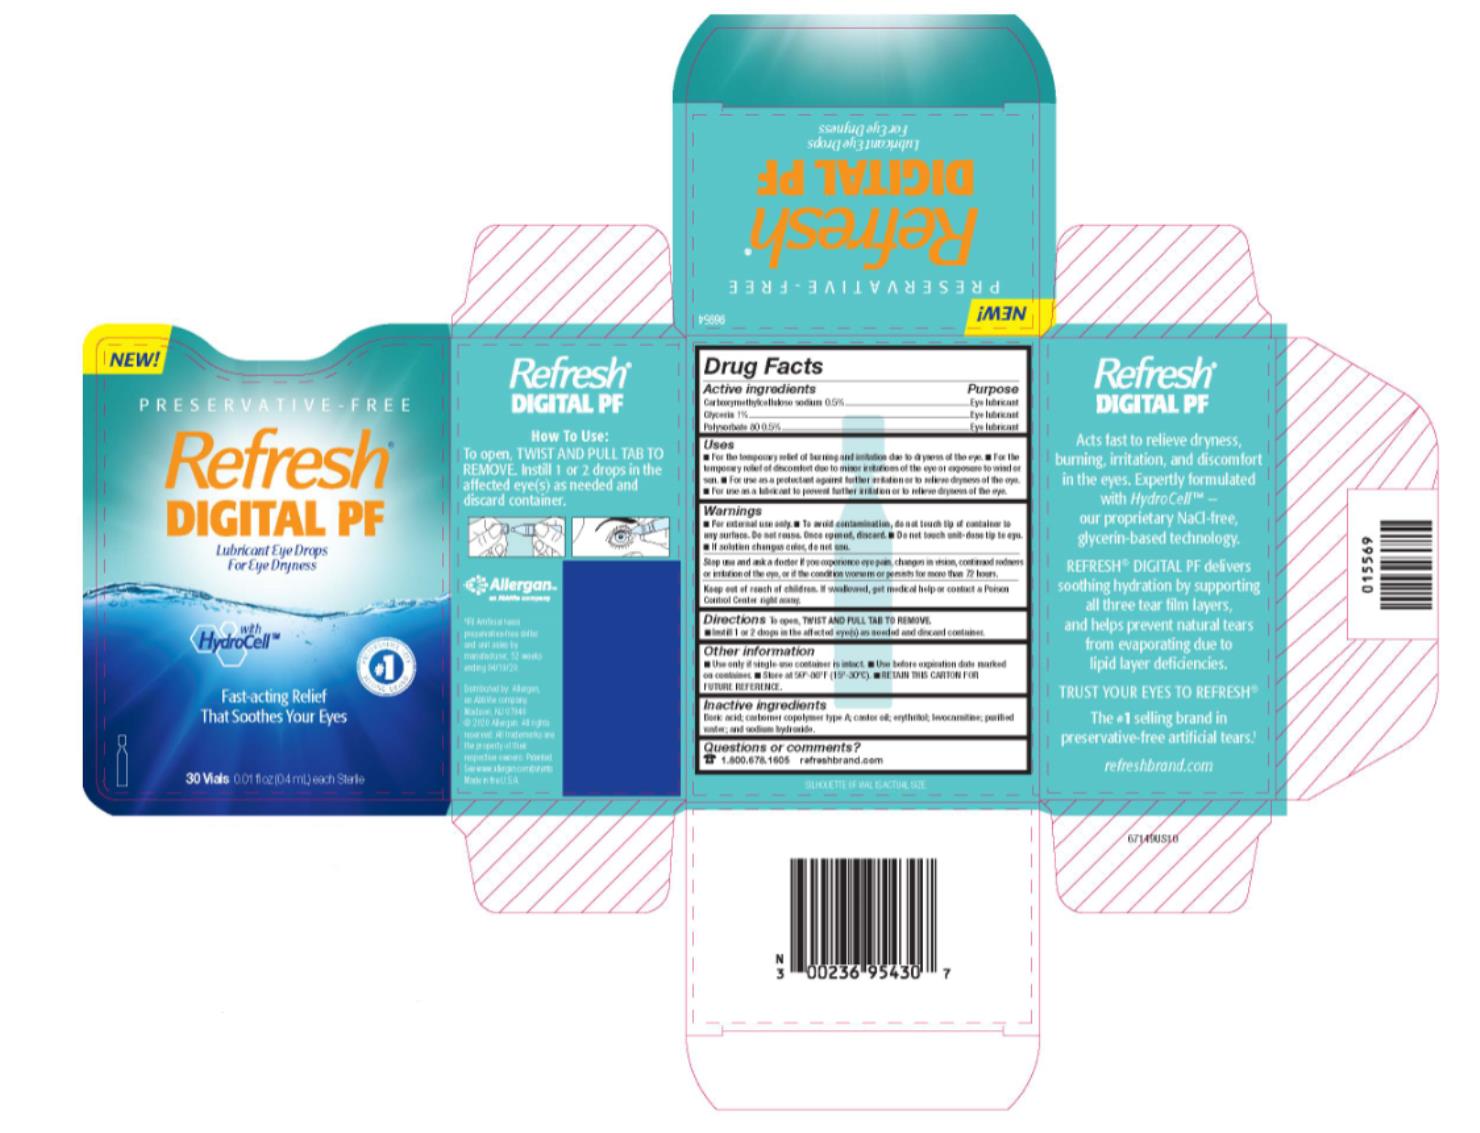 Principal Display Panel
NDC: <a href=/NDC/0023-6954-30>0023-6954-30</a>
Refresh®
 DIGITAL PF
Lubricant Eye Drops
For Eye Dryness
with
 HydroCell™
Fast-acting Relief
That Soothes Your Eyes
30 Vials (0.01 fl oz (0.4 mL) each Sterile 
